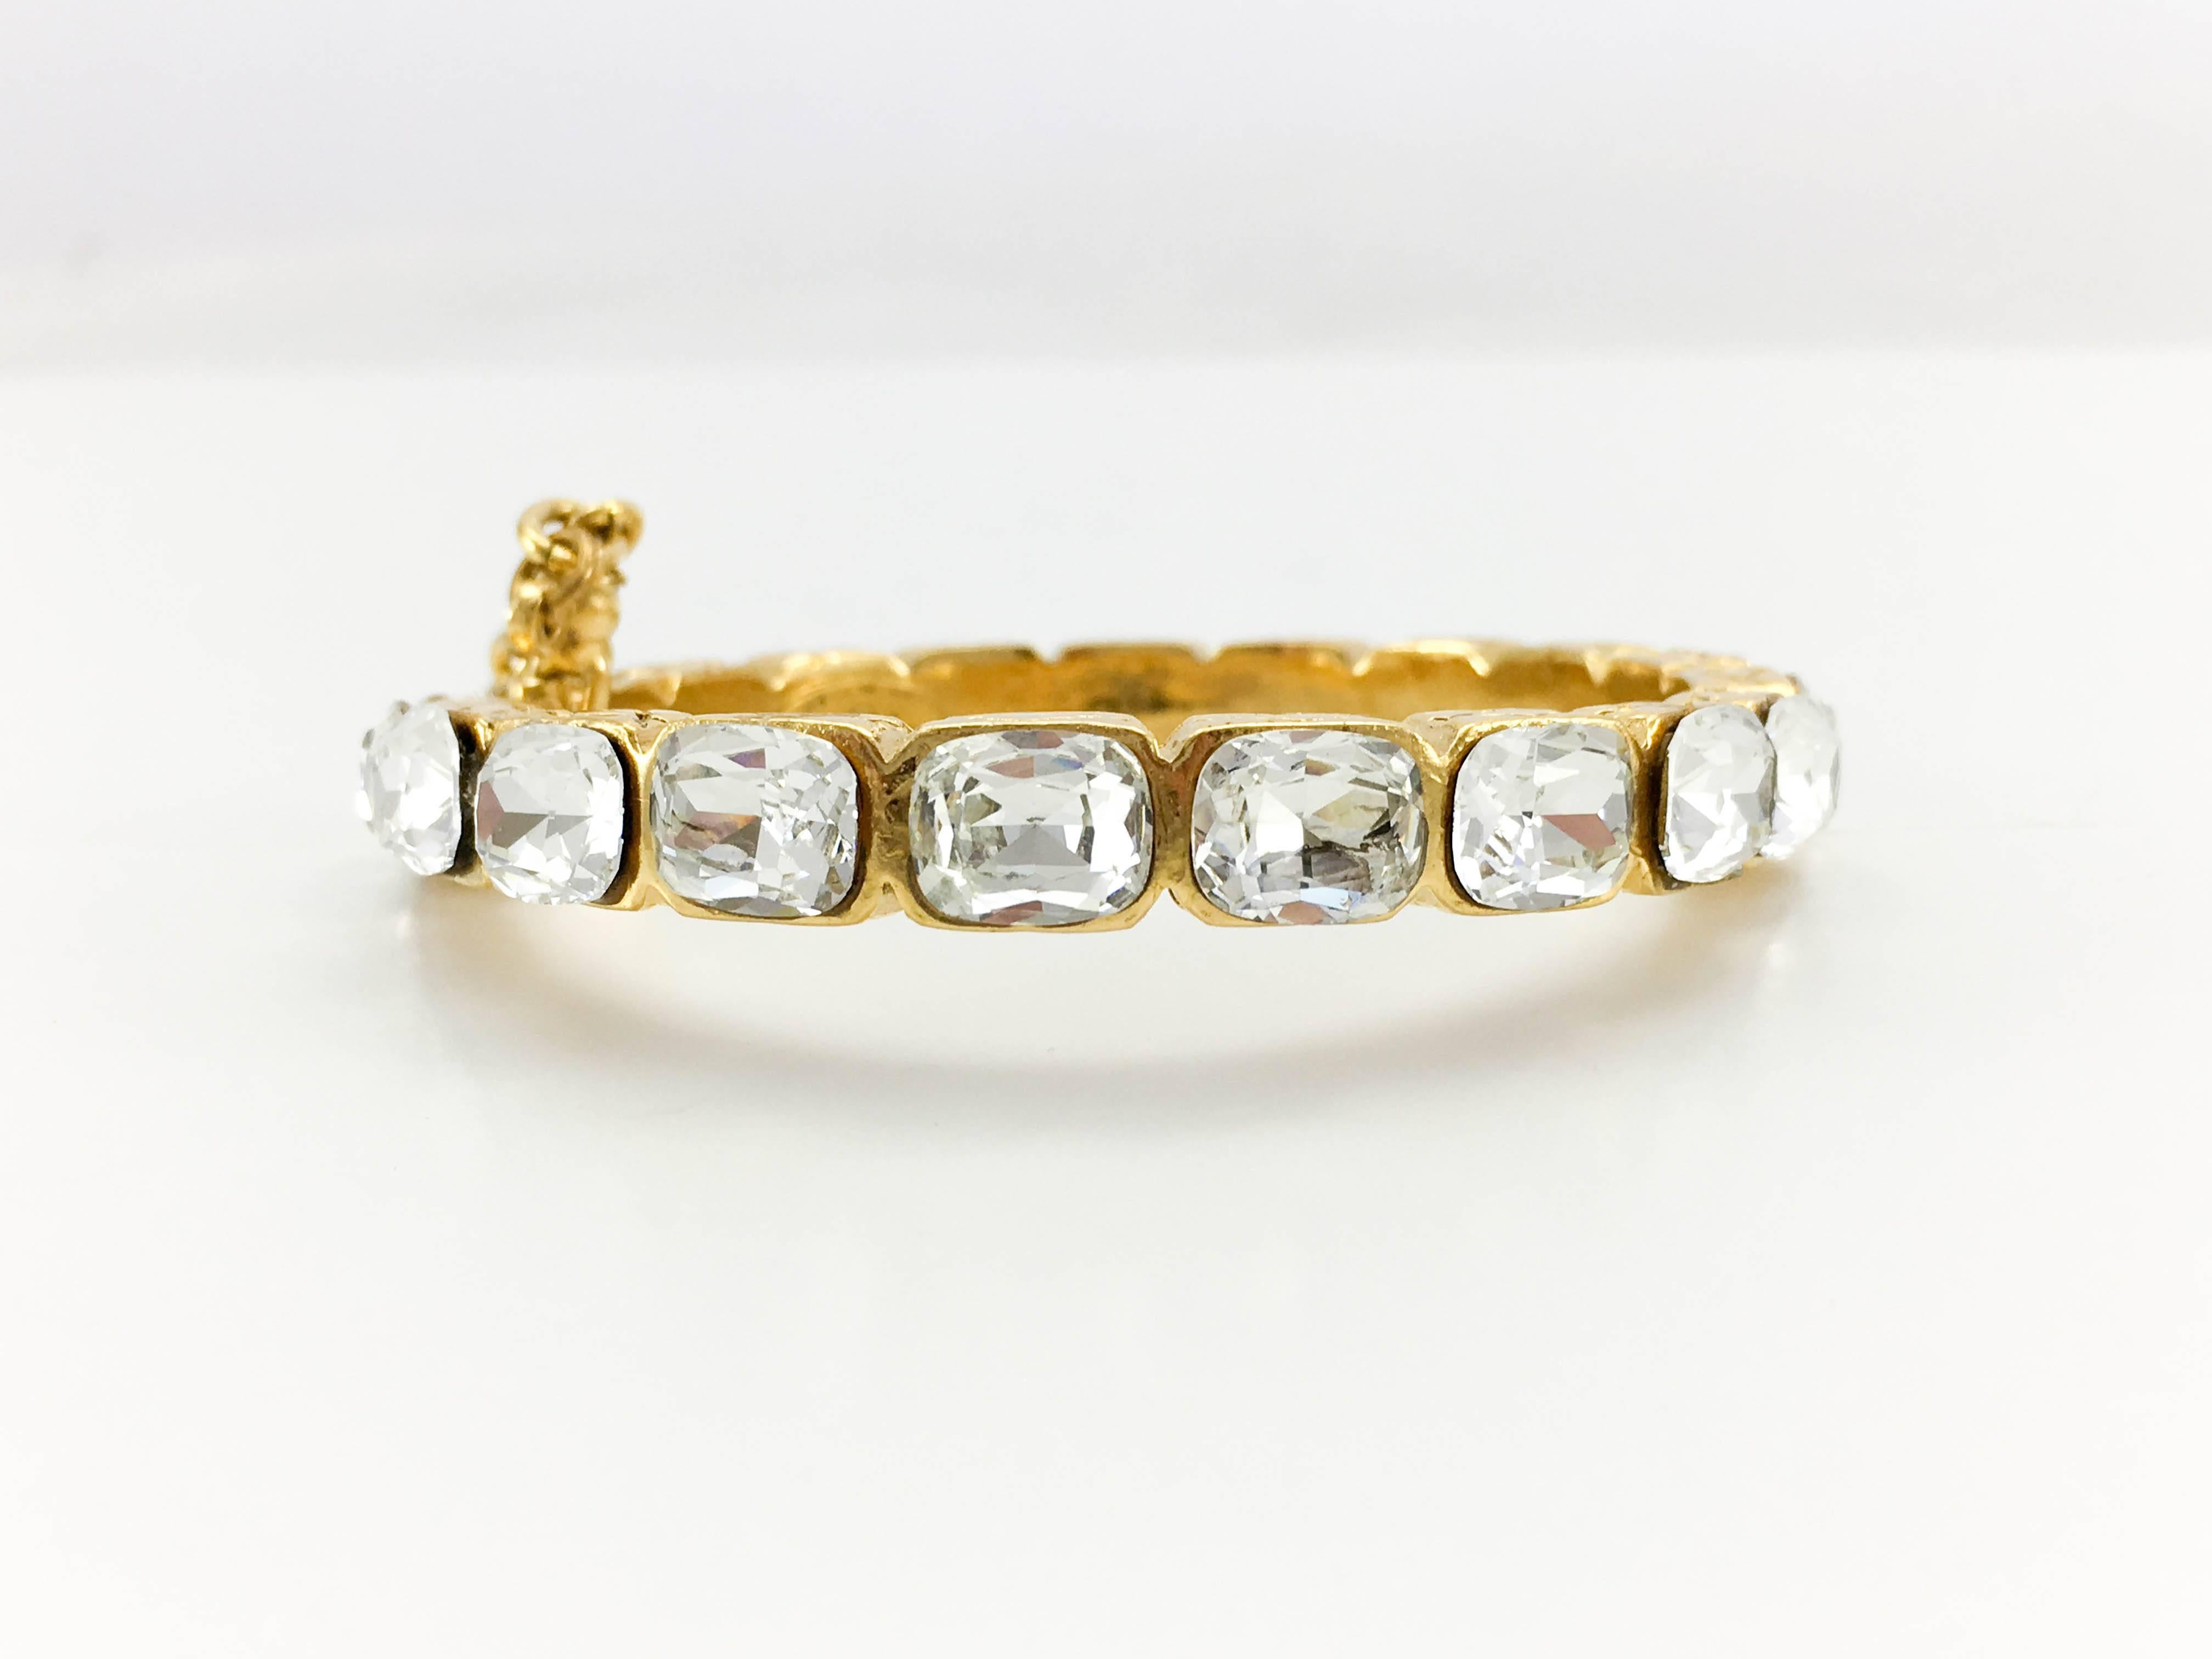 1986 Chanel Gold-Plated Quilted Bracelet Embellished With Crystals 1